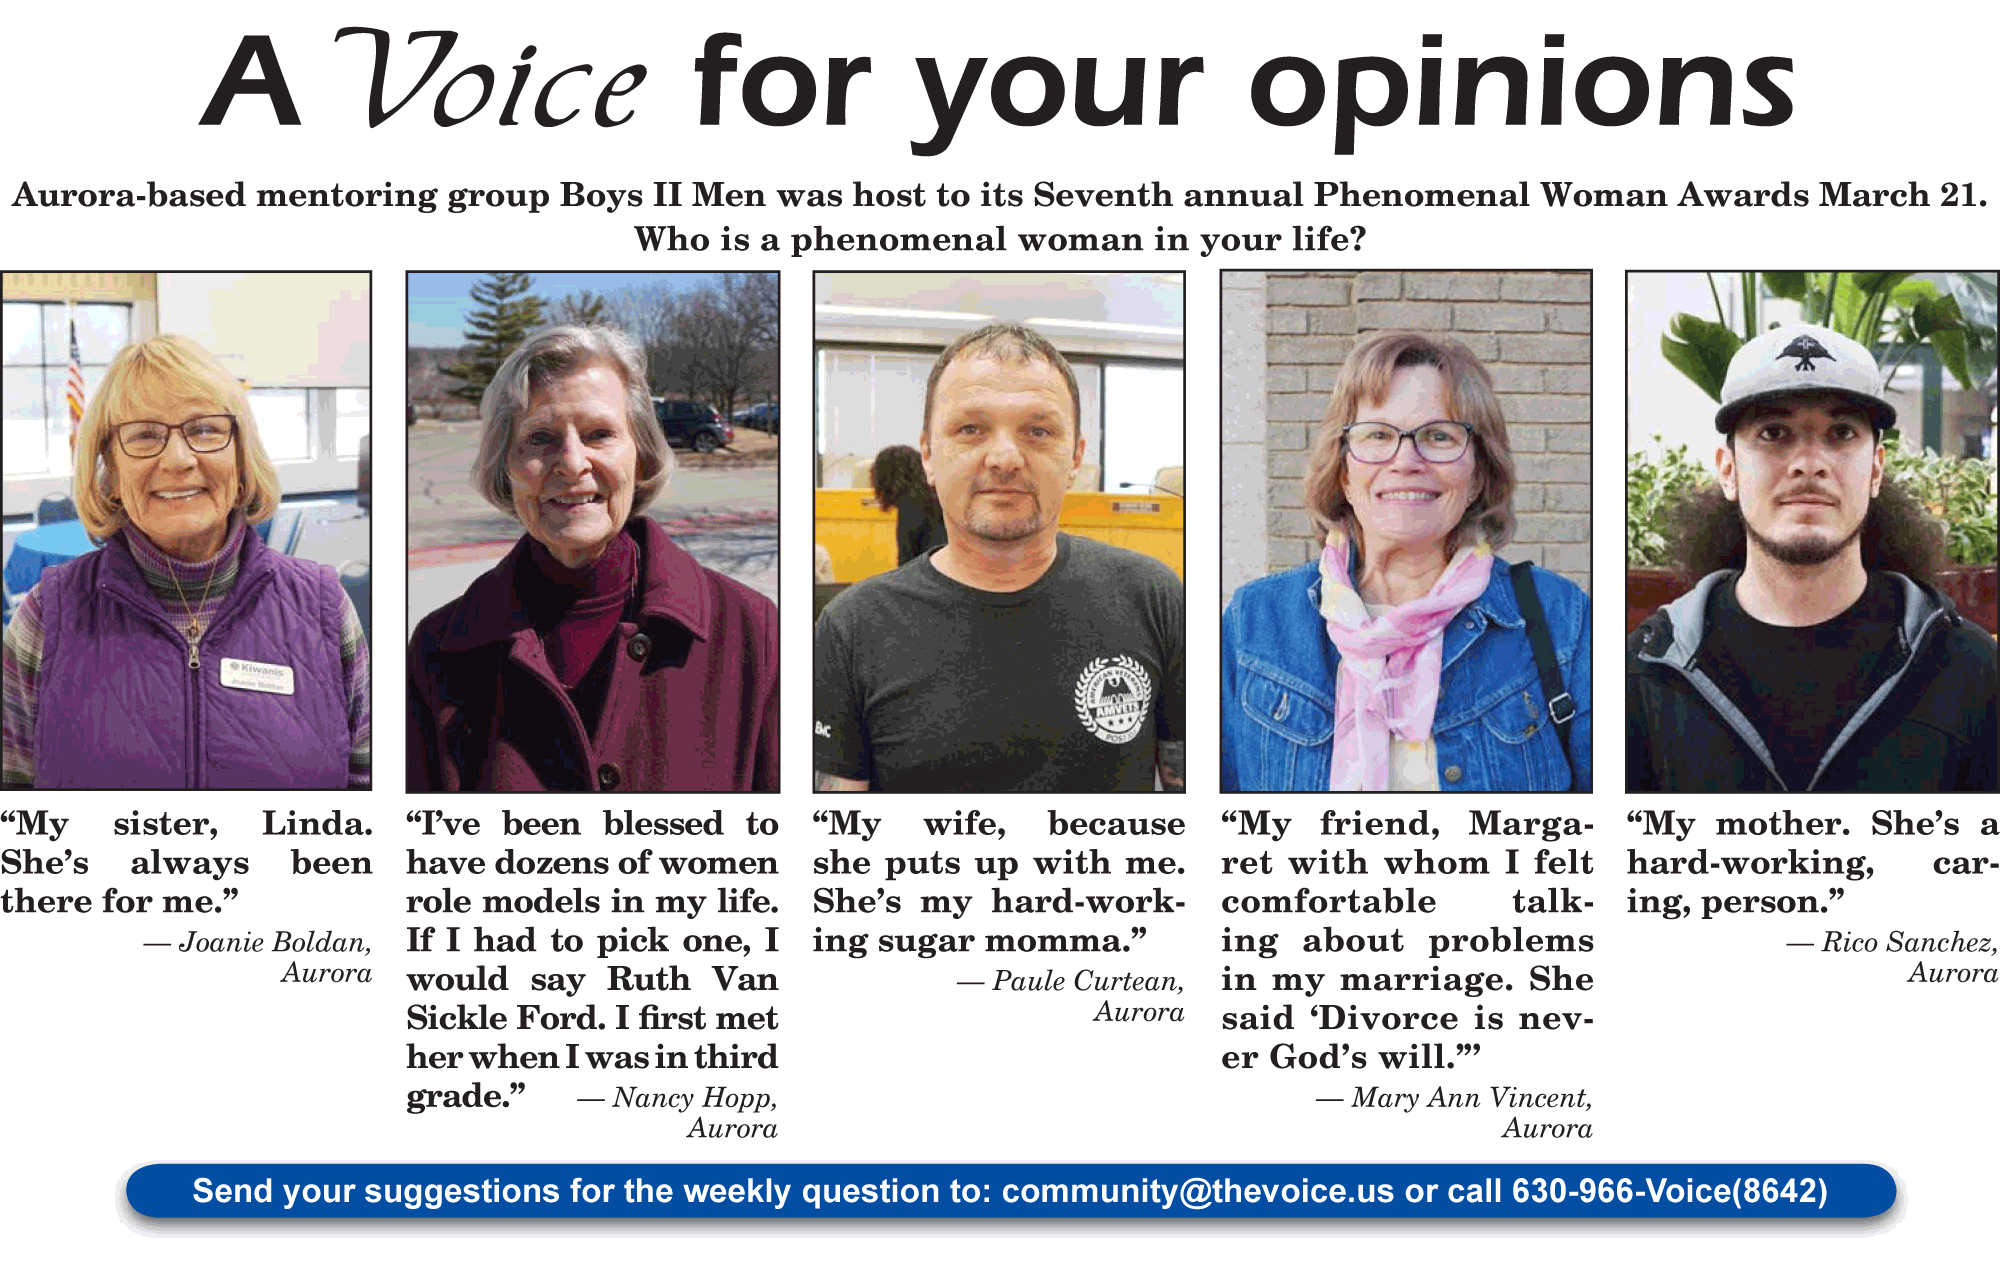 A Voice For Your Opinions March 28, 2019